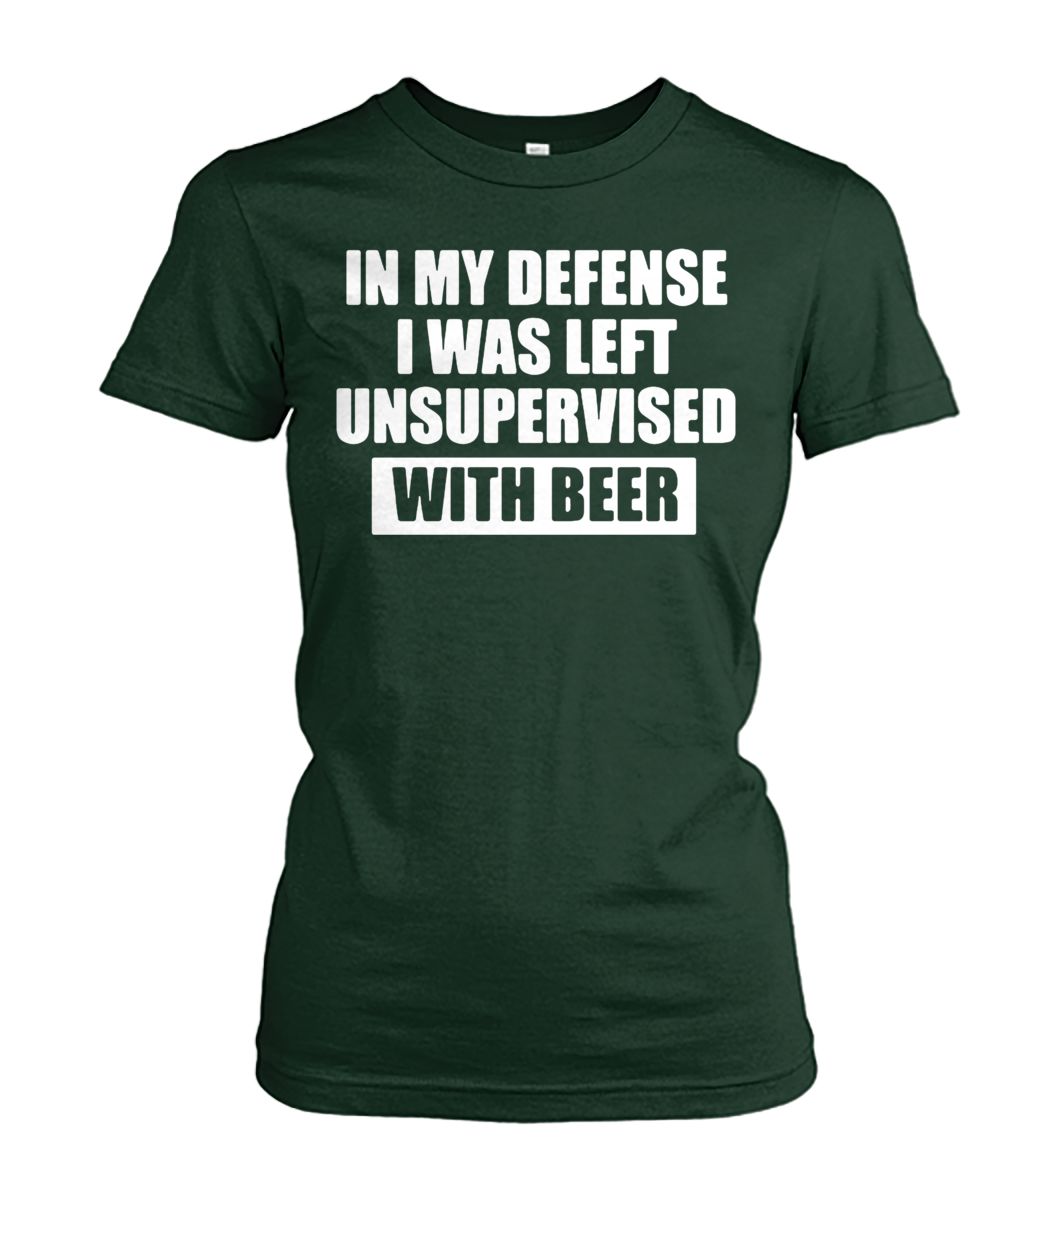 In my defense I was left unsupervised with beer women's crew tee